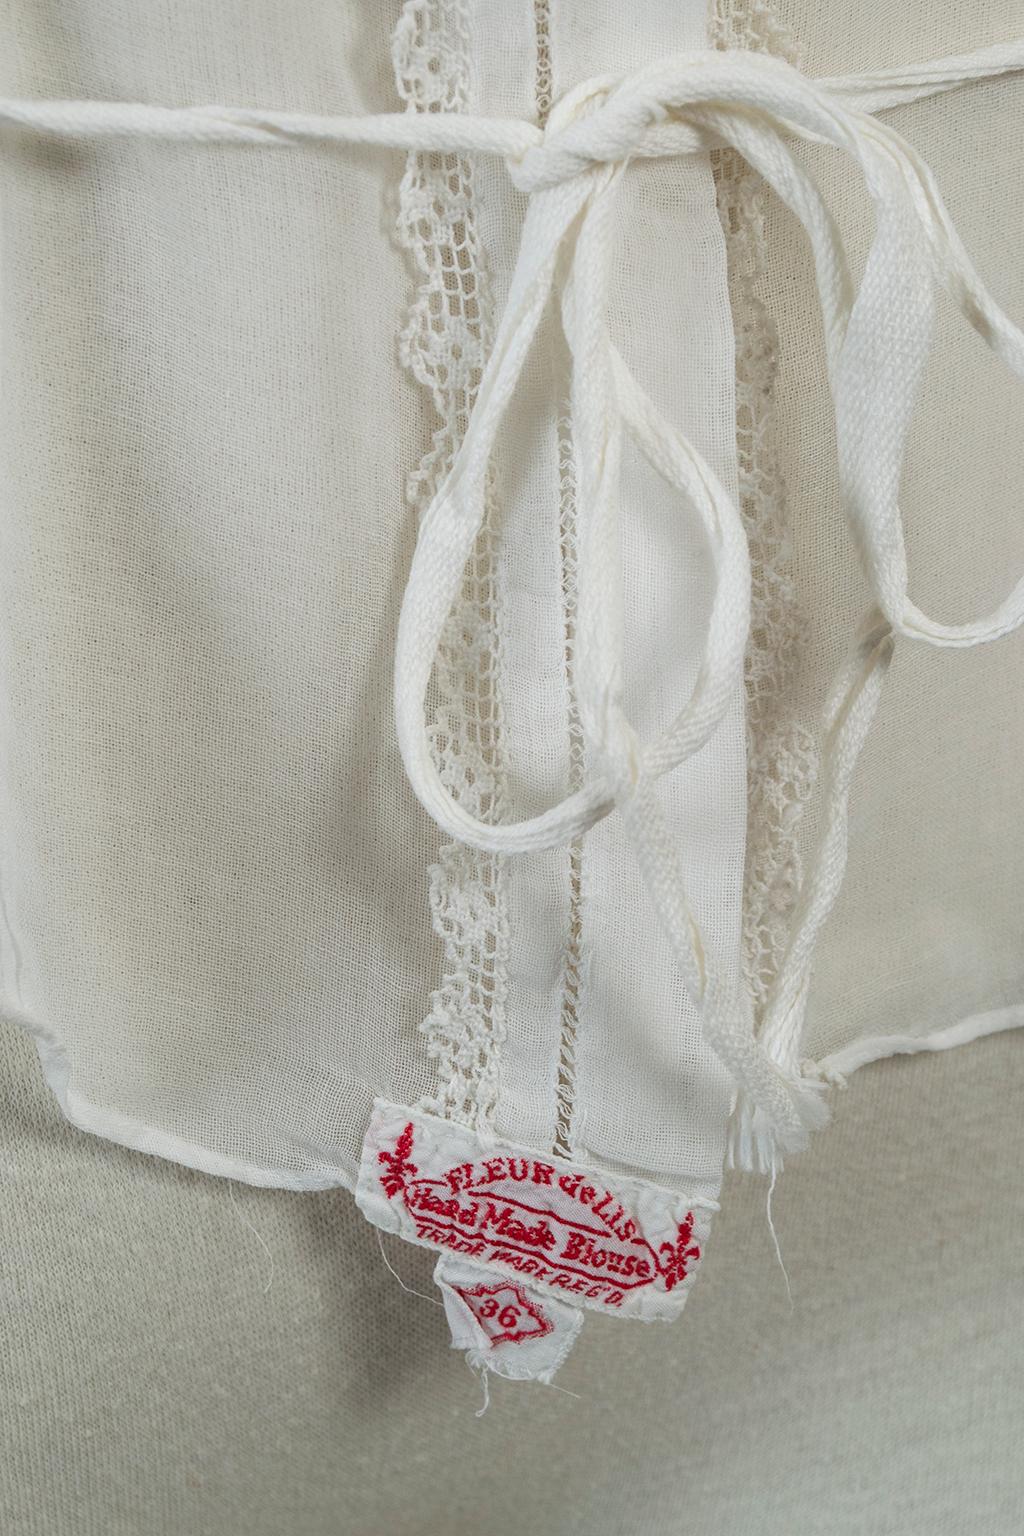 Edwardian White Embroidered Batiste Filet Lace Tie Waist Blouse - XS - S, 1910s For Sale 5